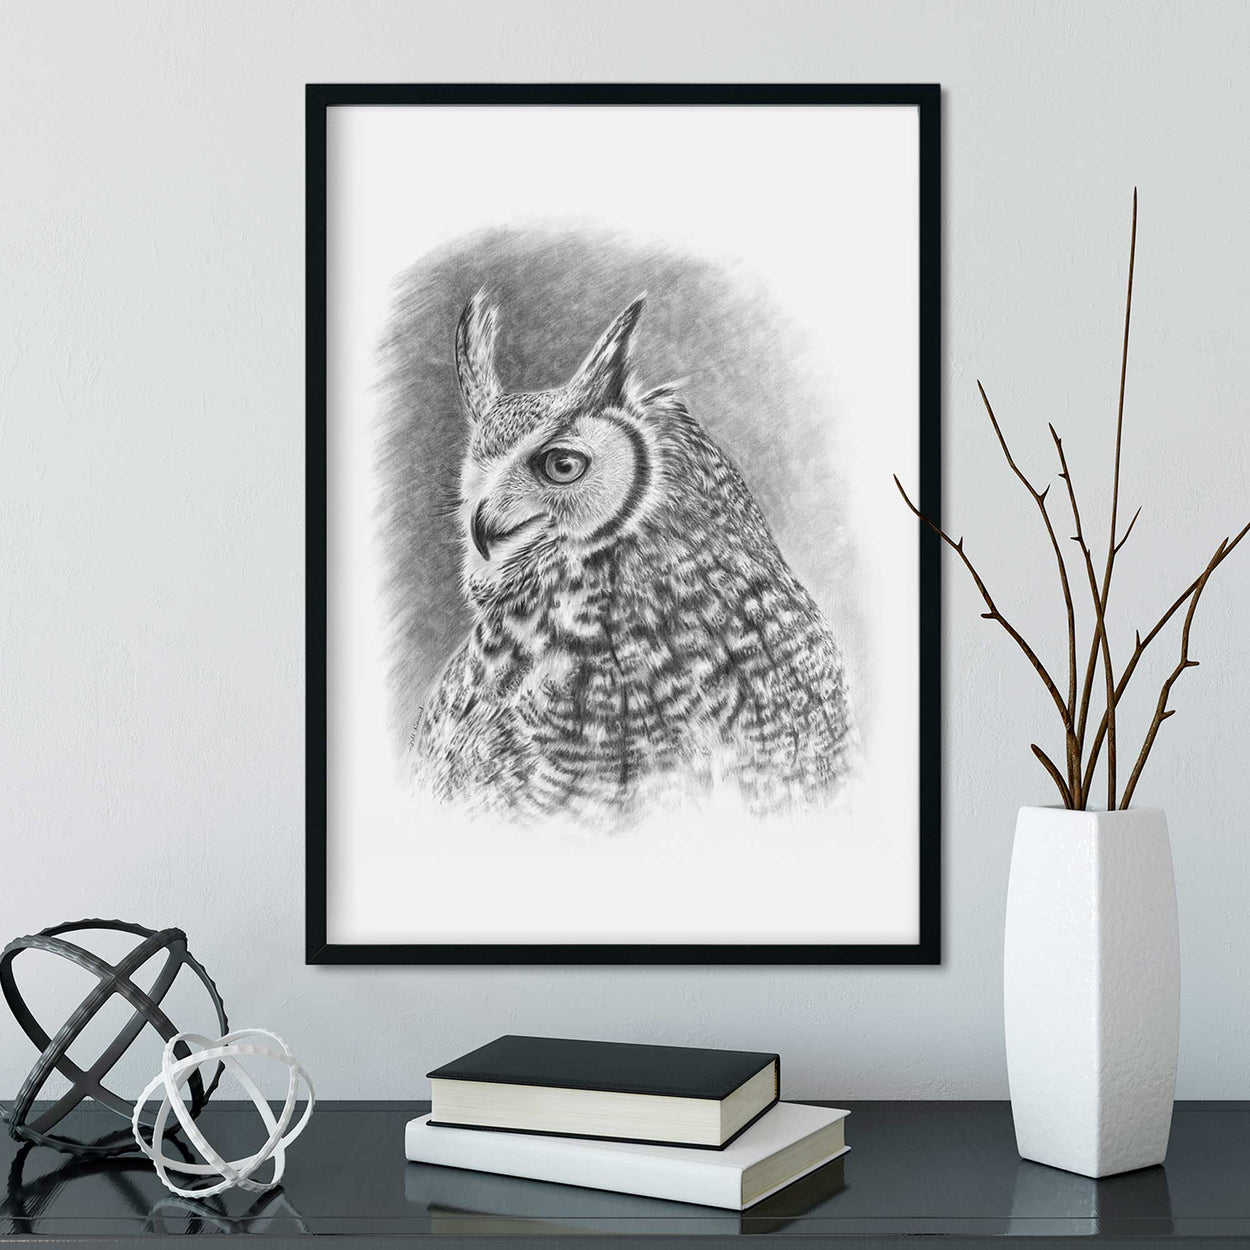 Black frame on wall containing black and white drawing of a great horned owl